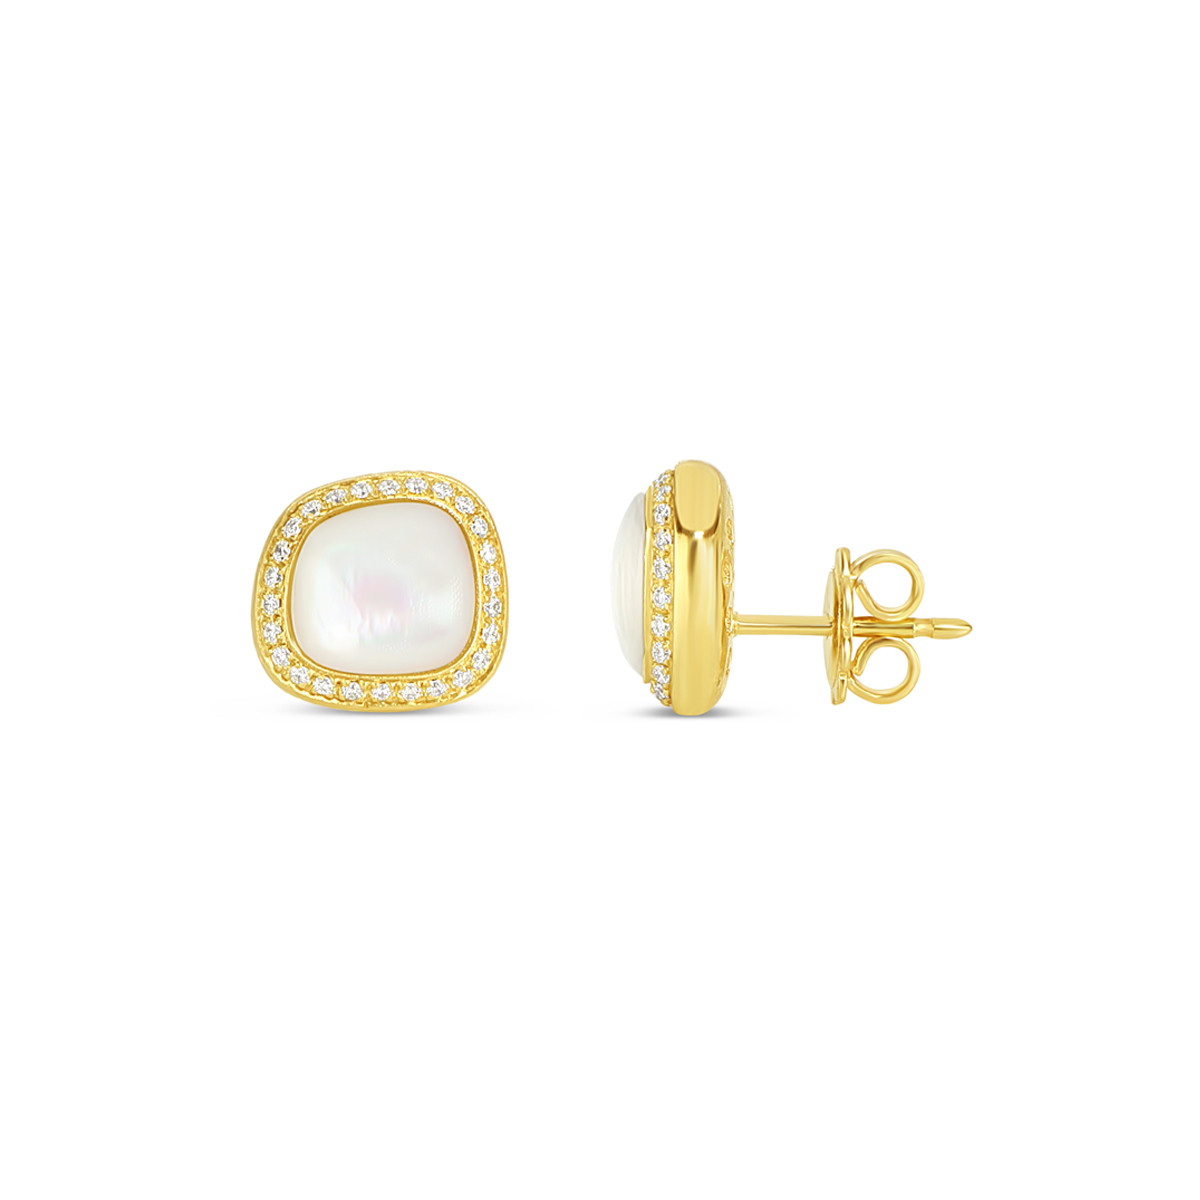 Yellow gold earrings with diamonds and white gems